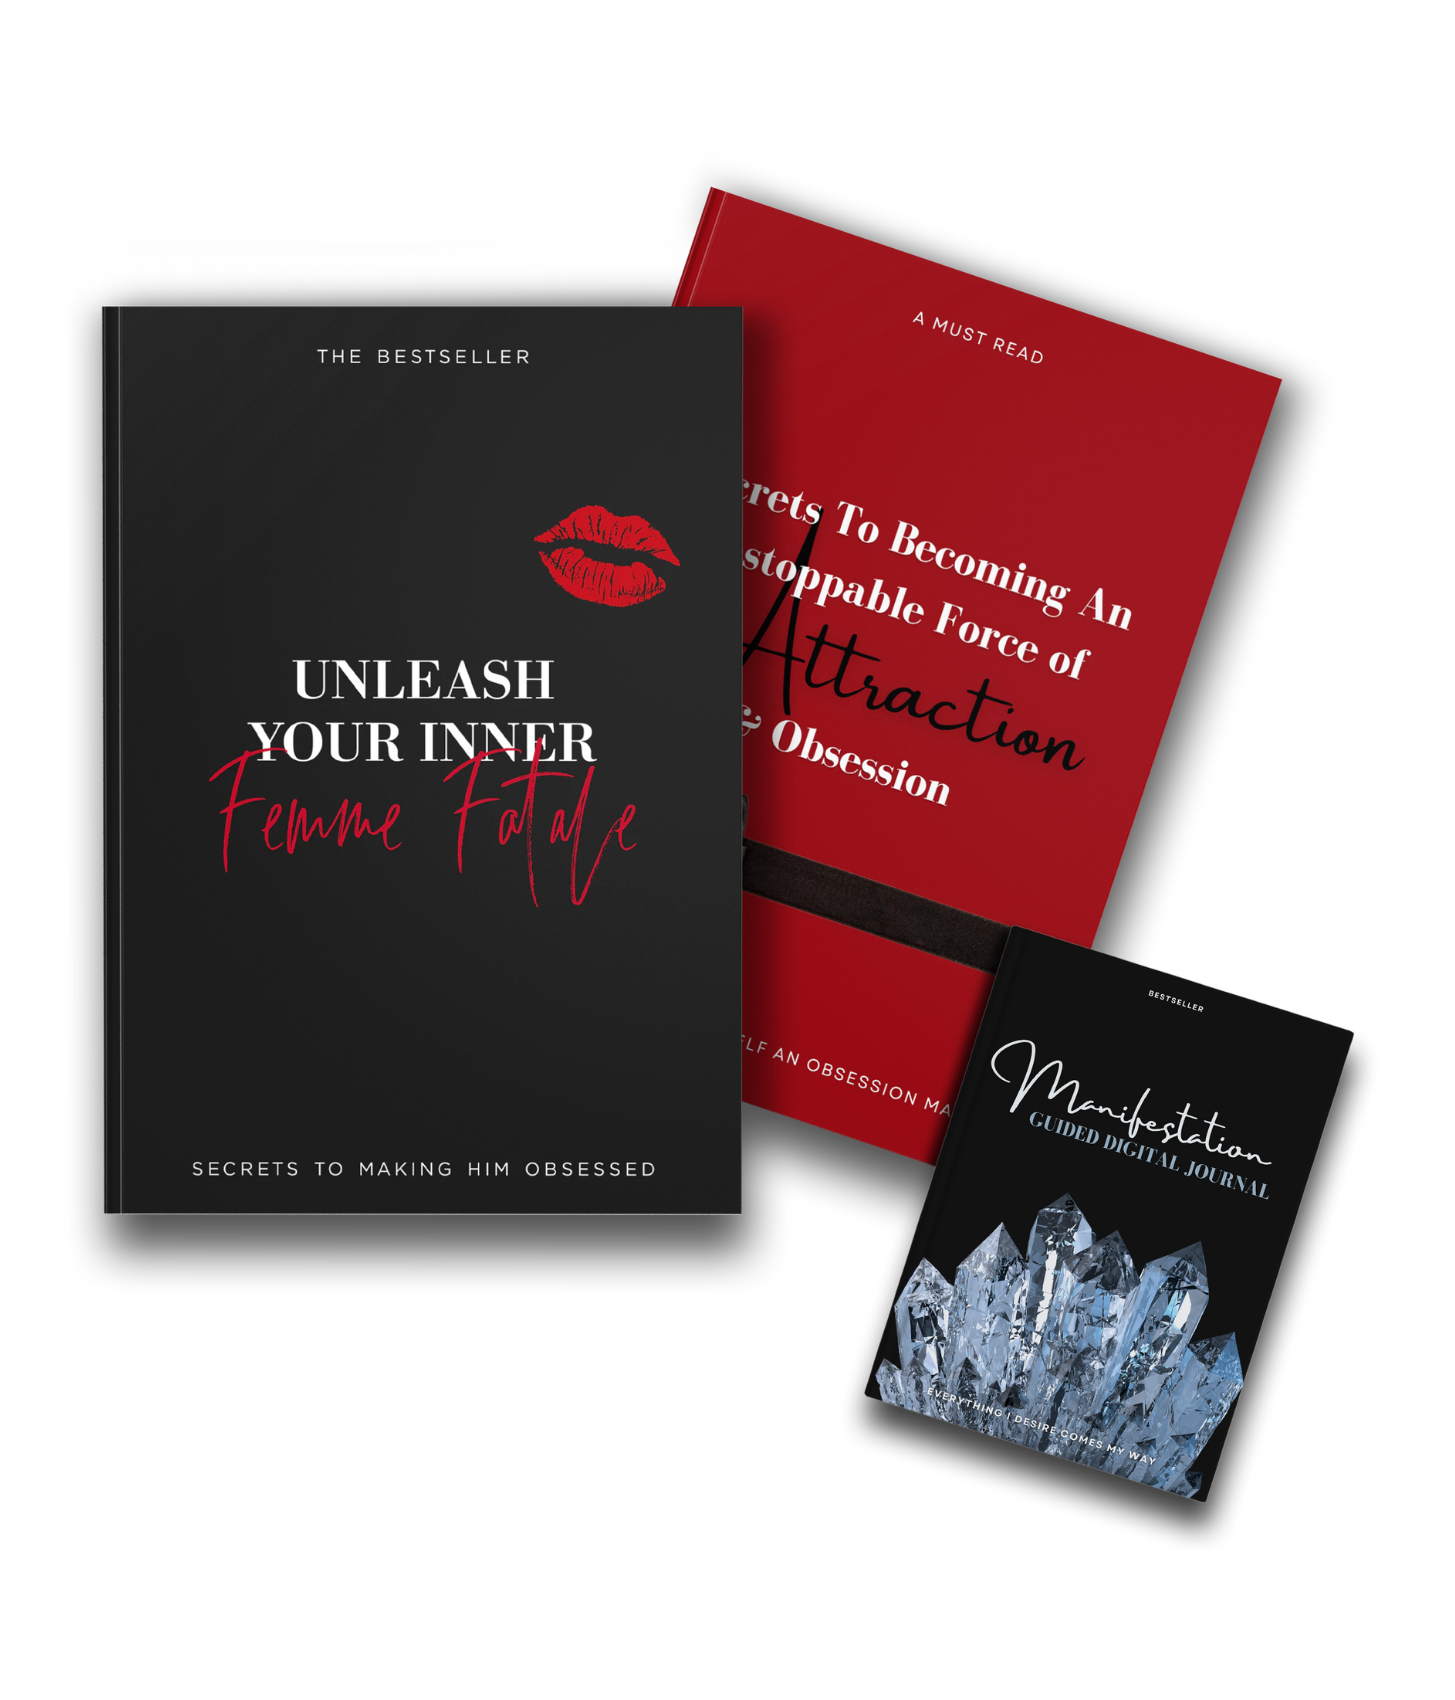 Unleash Your Inner Femme Fatale - Secrets To Making Him Obsessed